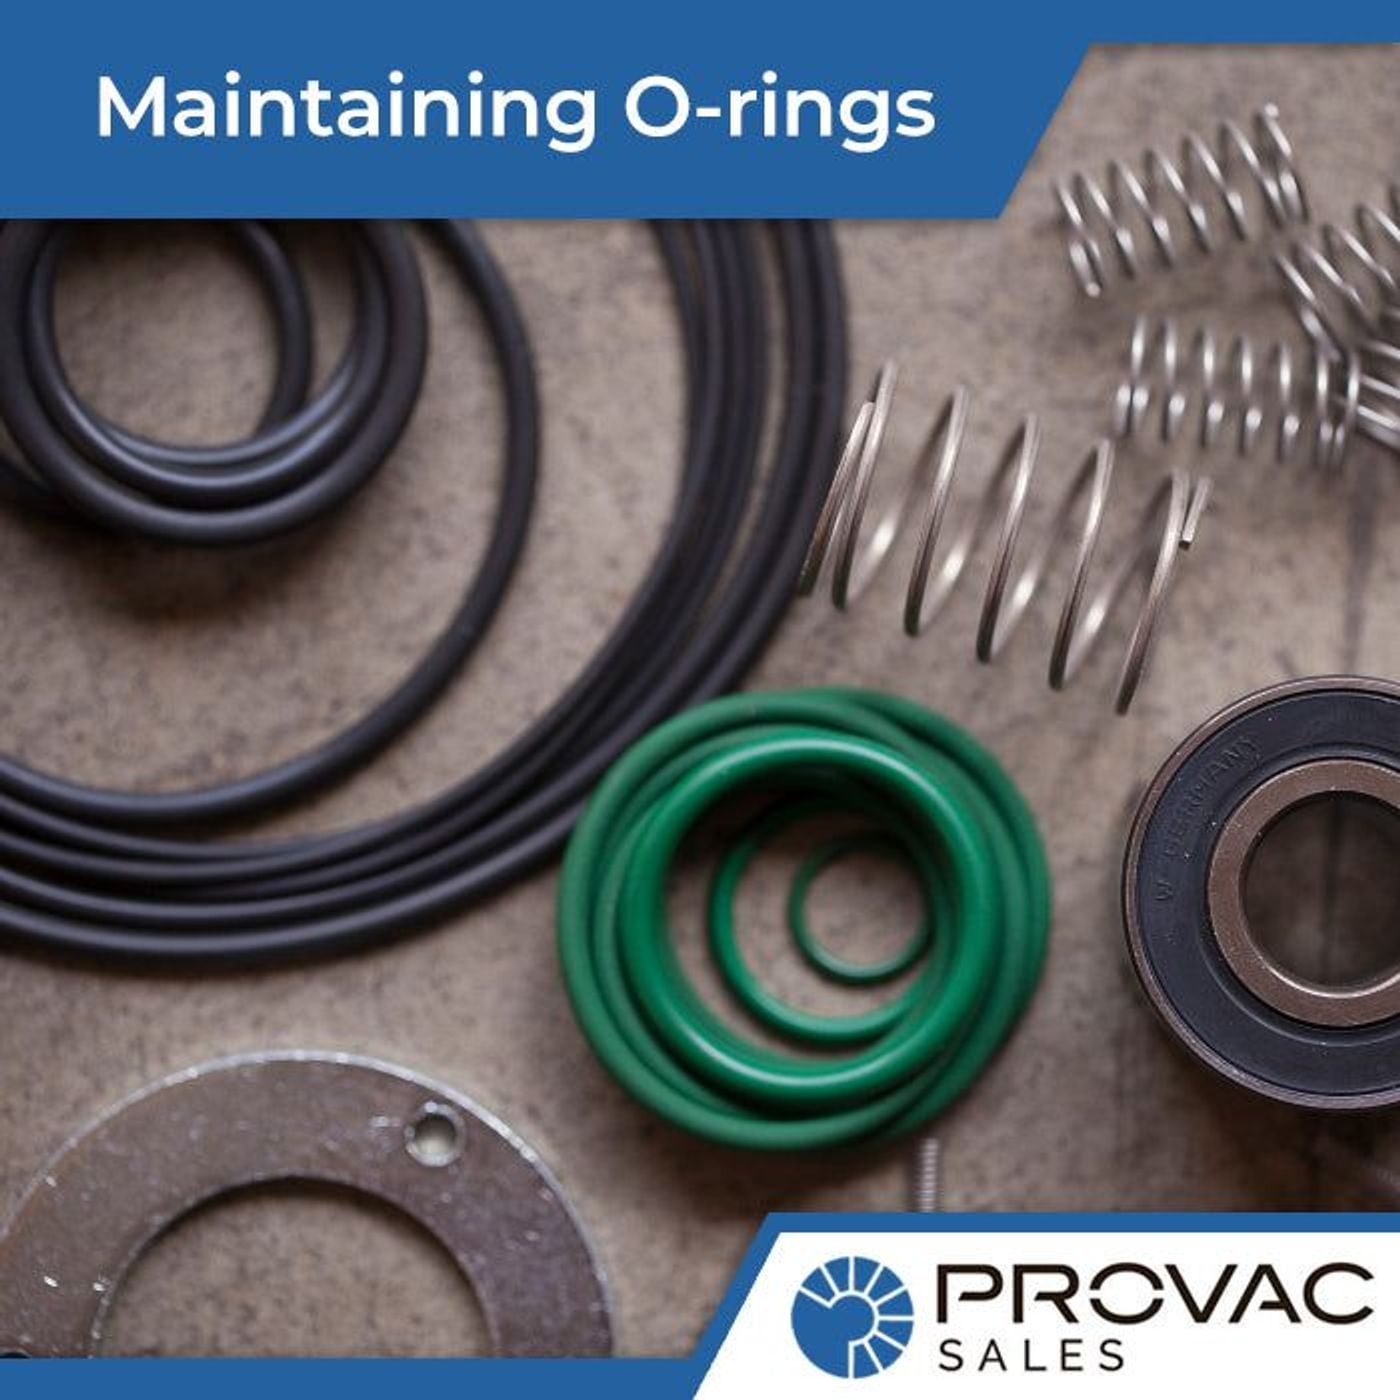 How To Maintain O-Rings